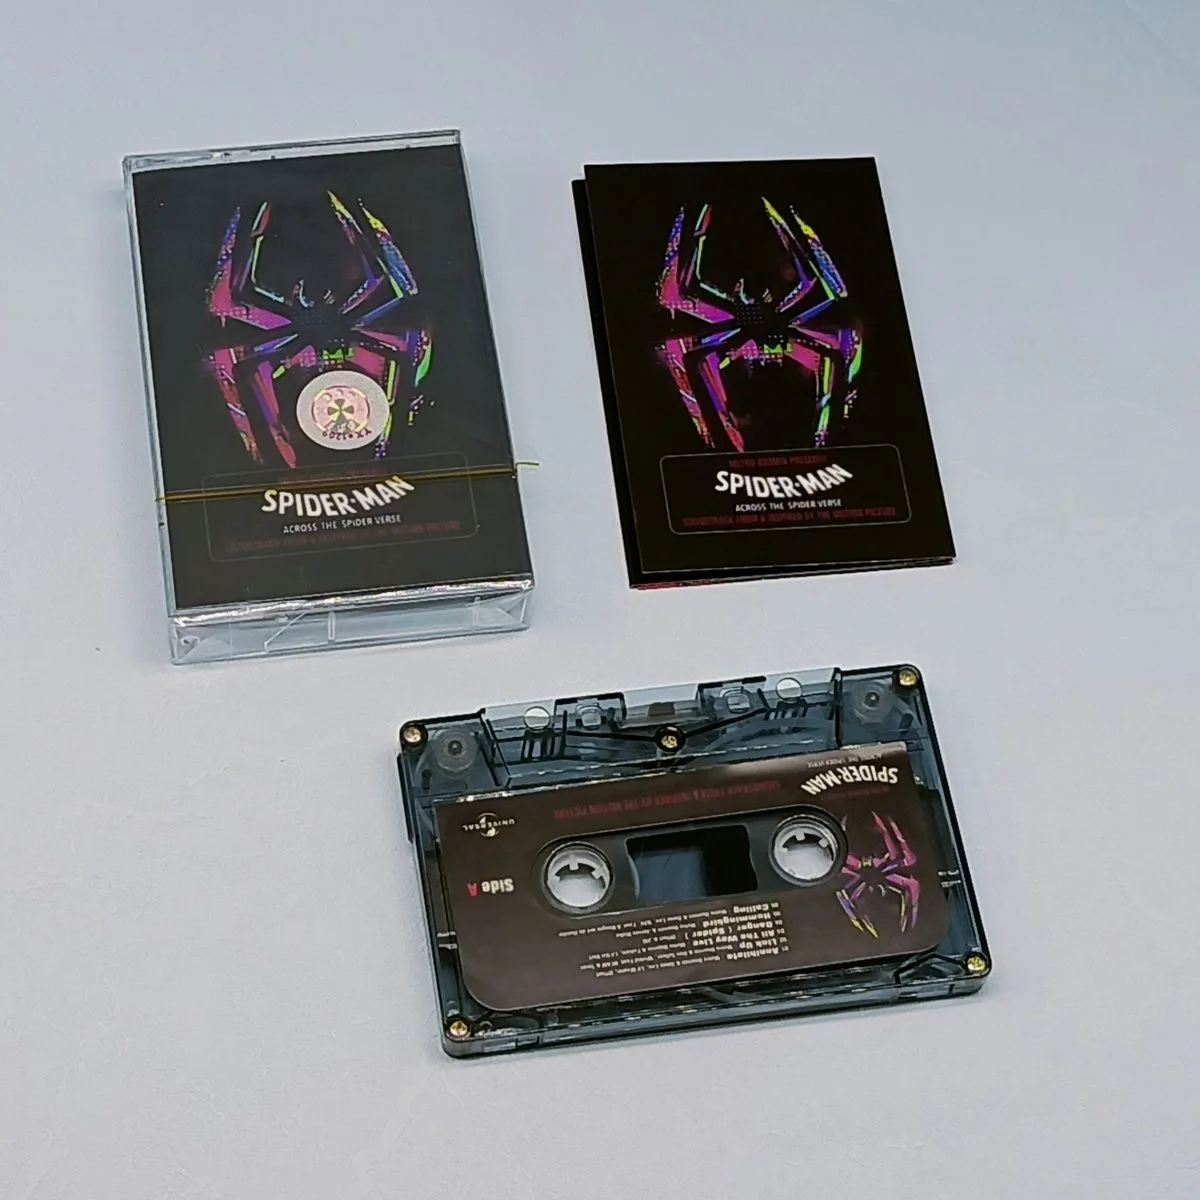  the spider verse music tape peter parker spiderman miles morales gwen cosplay cassette thumb200